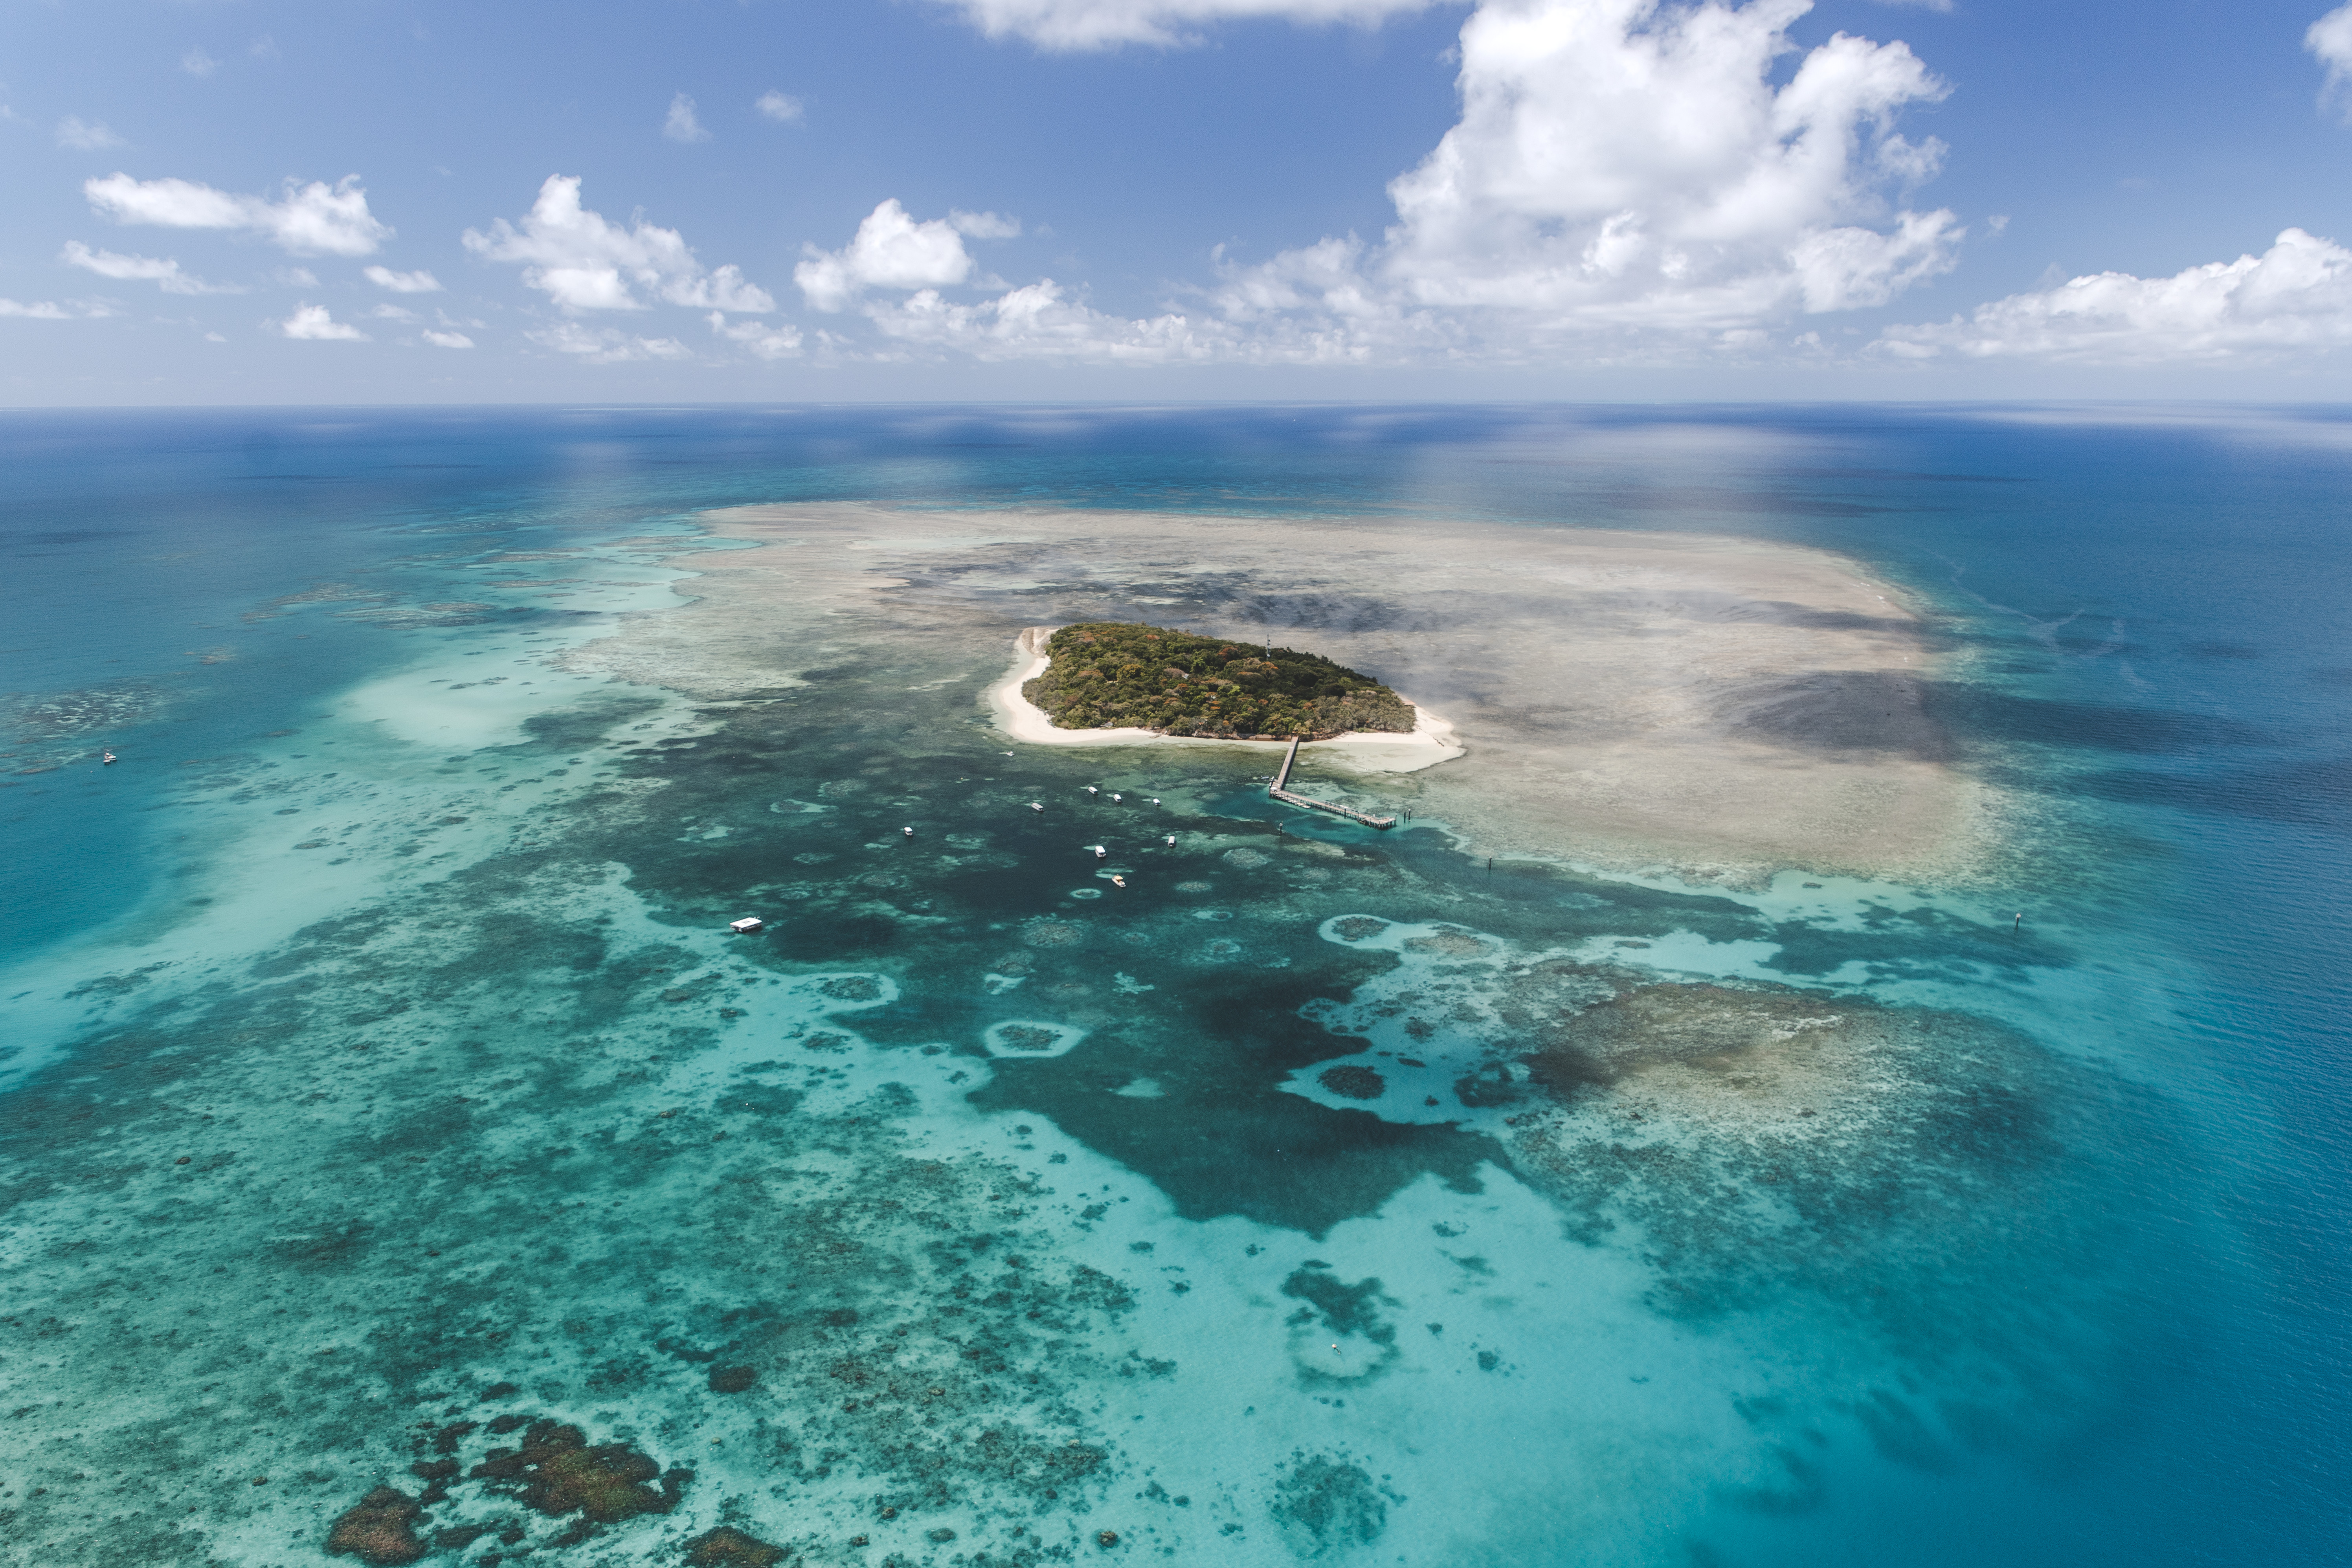 Aerial view of an island in the Great Barrier Reef.